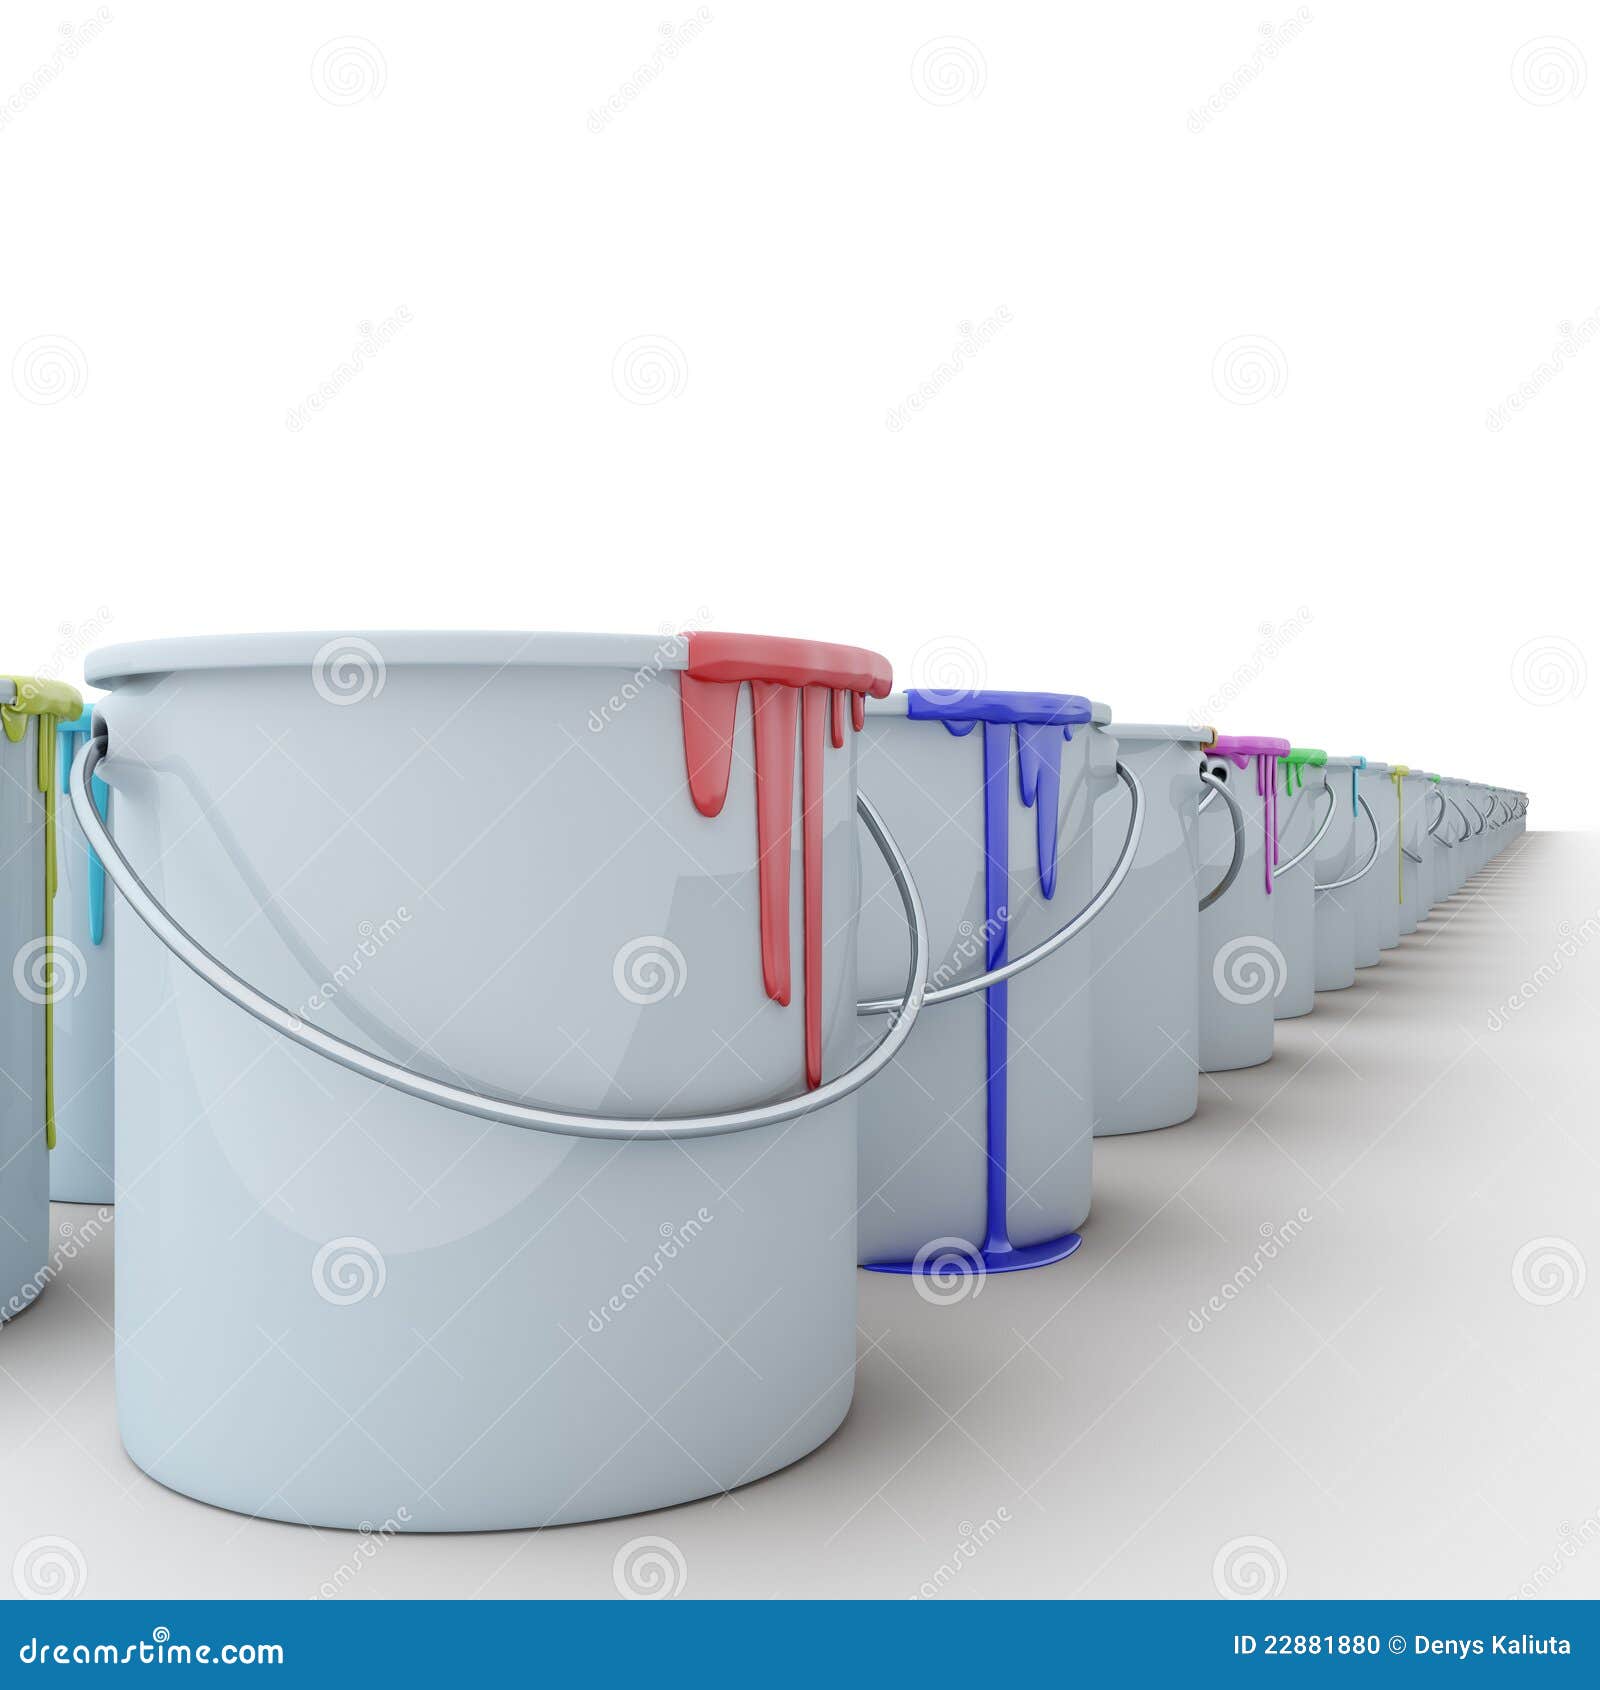 buckets with paints3